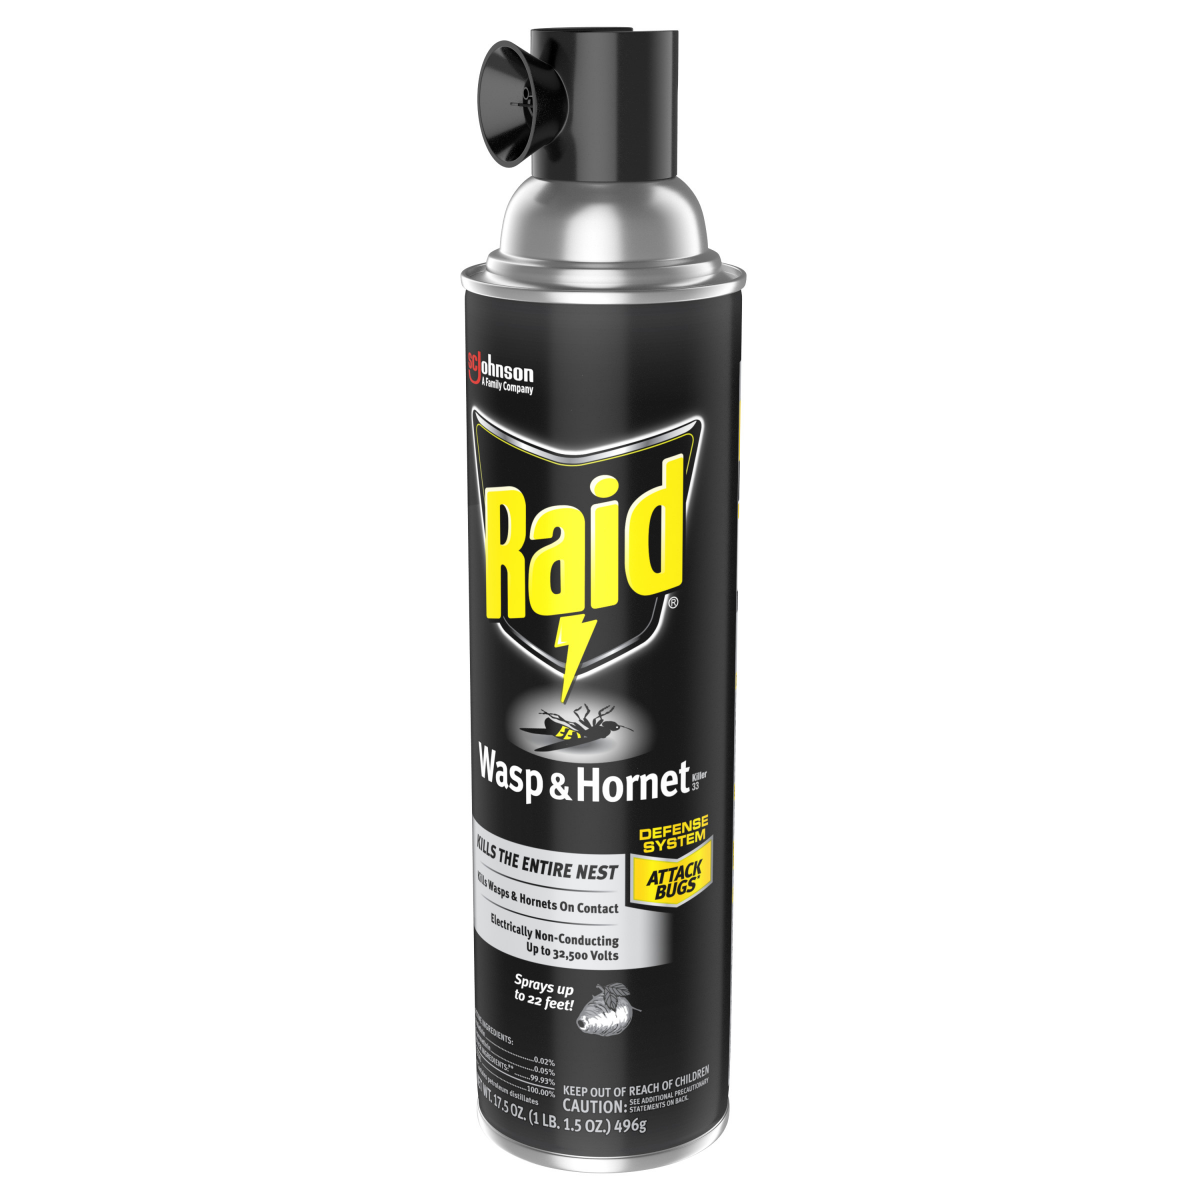 slide 9 of 29, Raid Wasp And Hornet Insecticide Spray, 17.5 oz